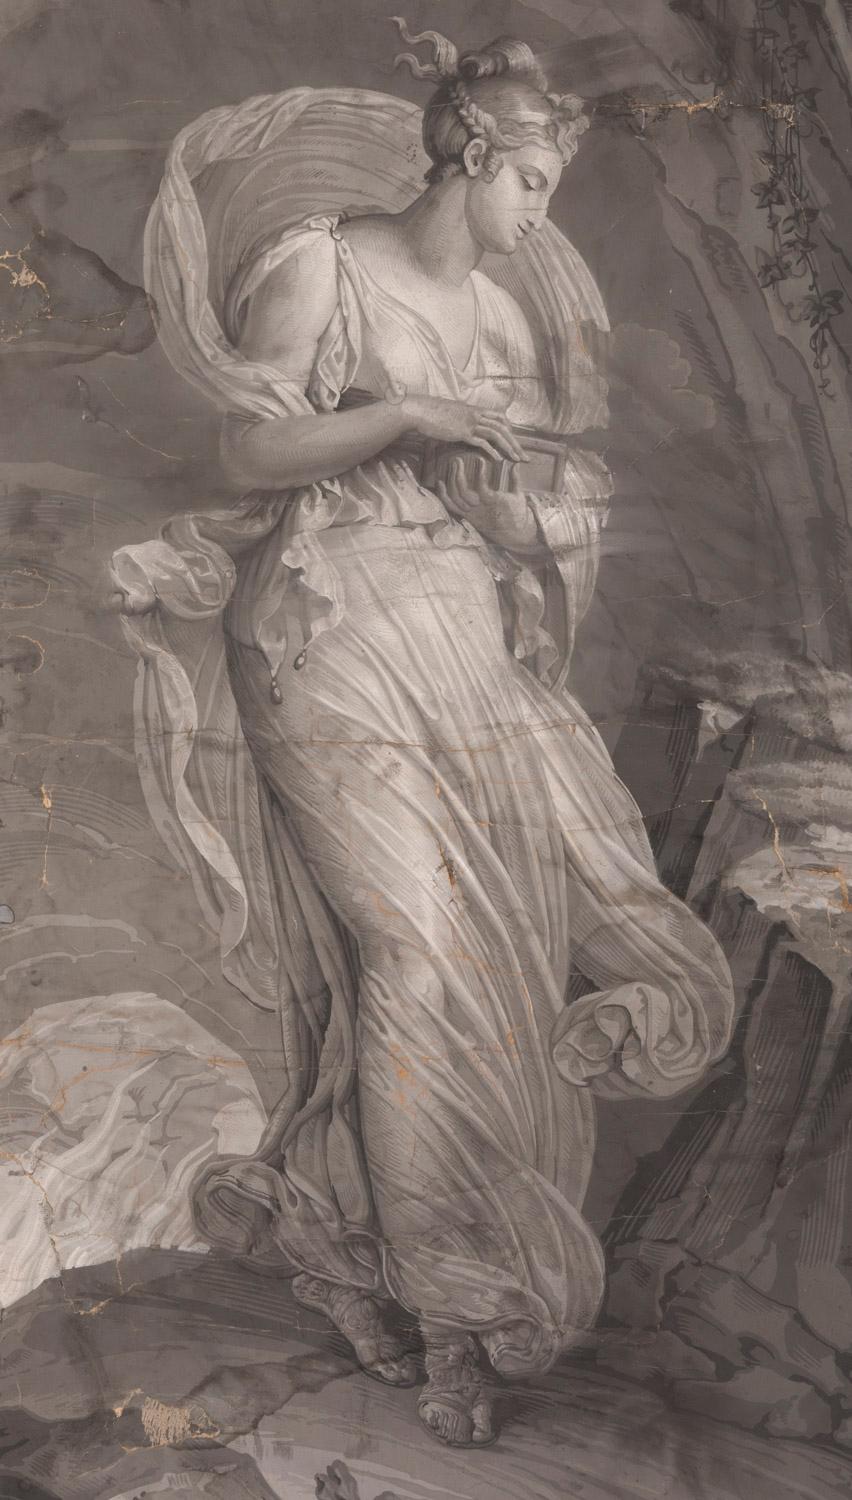 Manufacture Dufour, author.

Pair of greyness wallpapers by the Manufacture Dufour figuring two scenes from the history of Psyche and Cupid.
One represents Psyche, dressed in the Antique style, walking on a mineral landscape, emerging from Hell